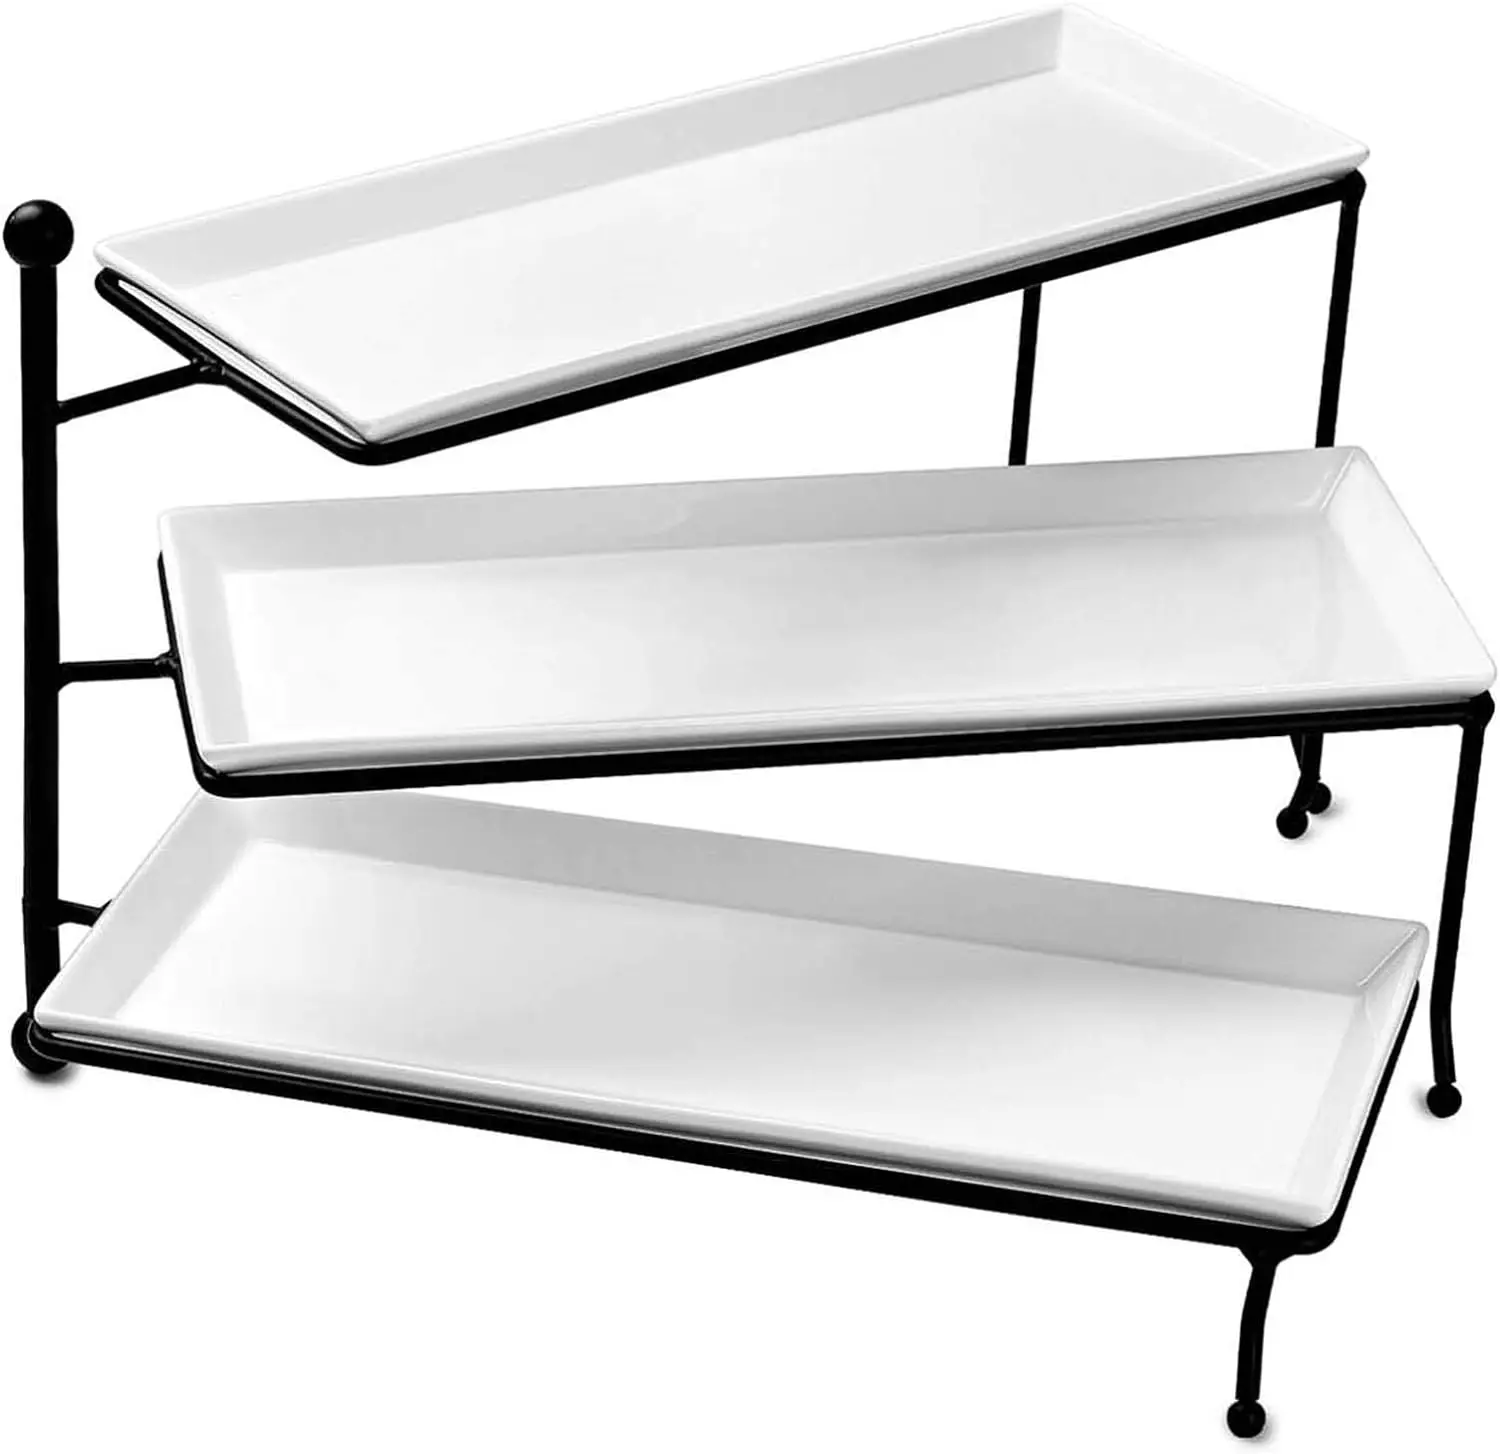 

3 Tiered Serving Stand, Foldable Rectangular Food Display Stand with White Porcelain Platters - Serving Trays, Dessert Display S